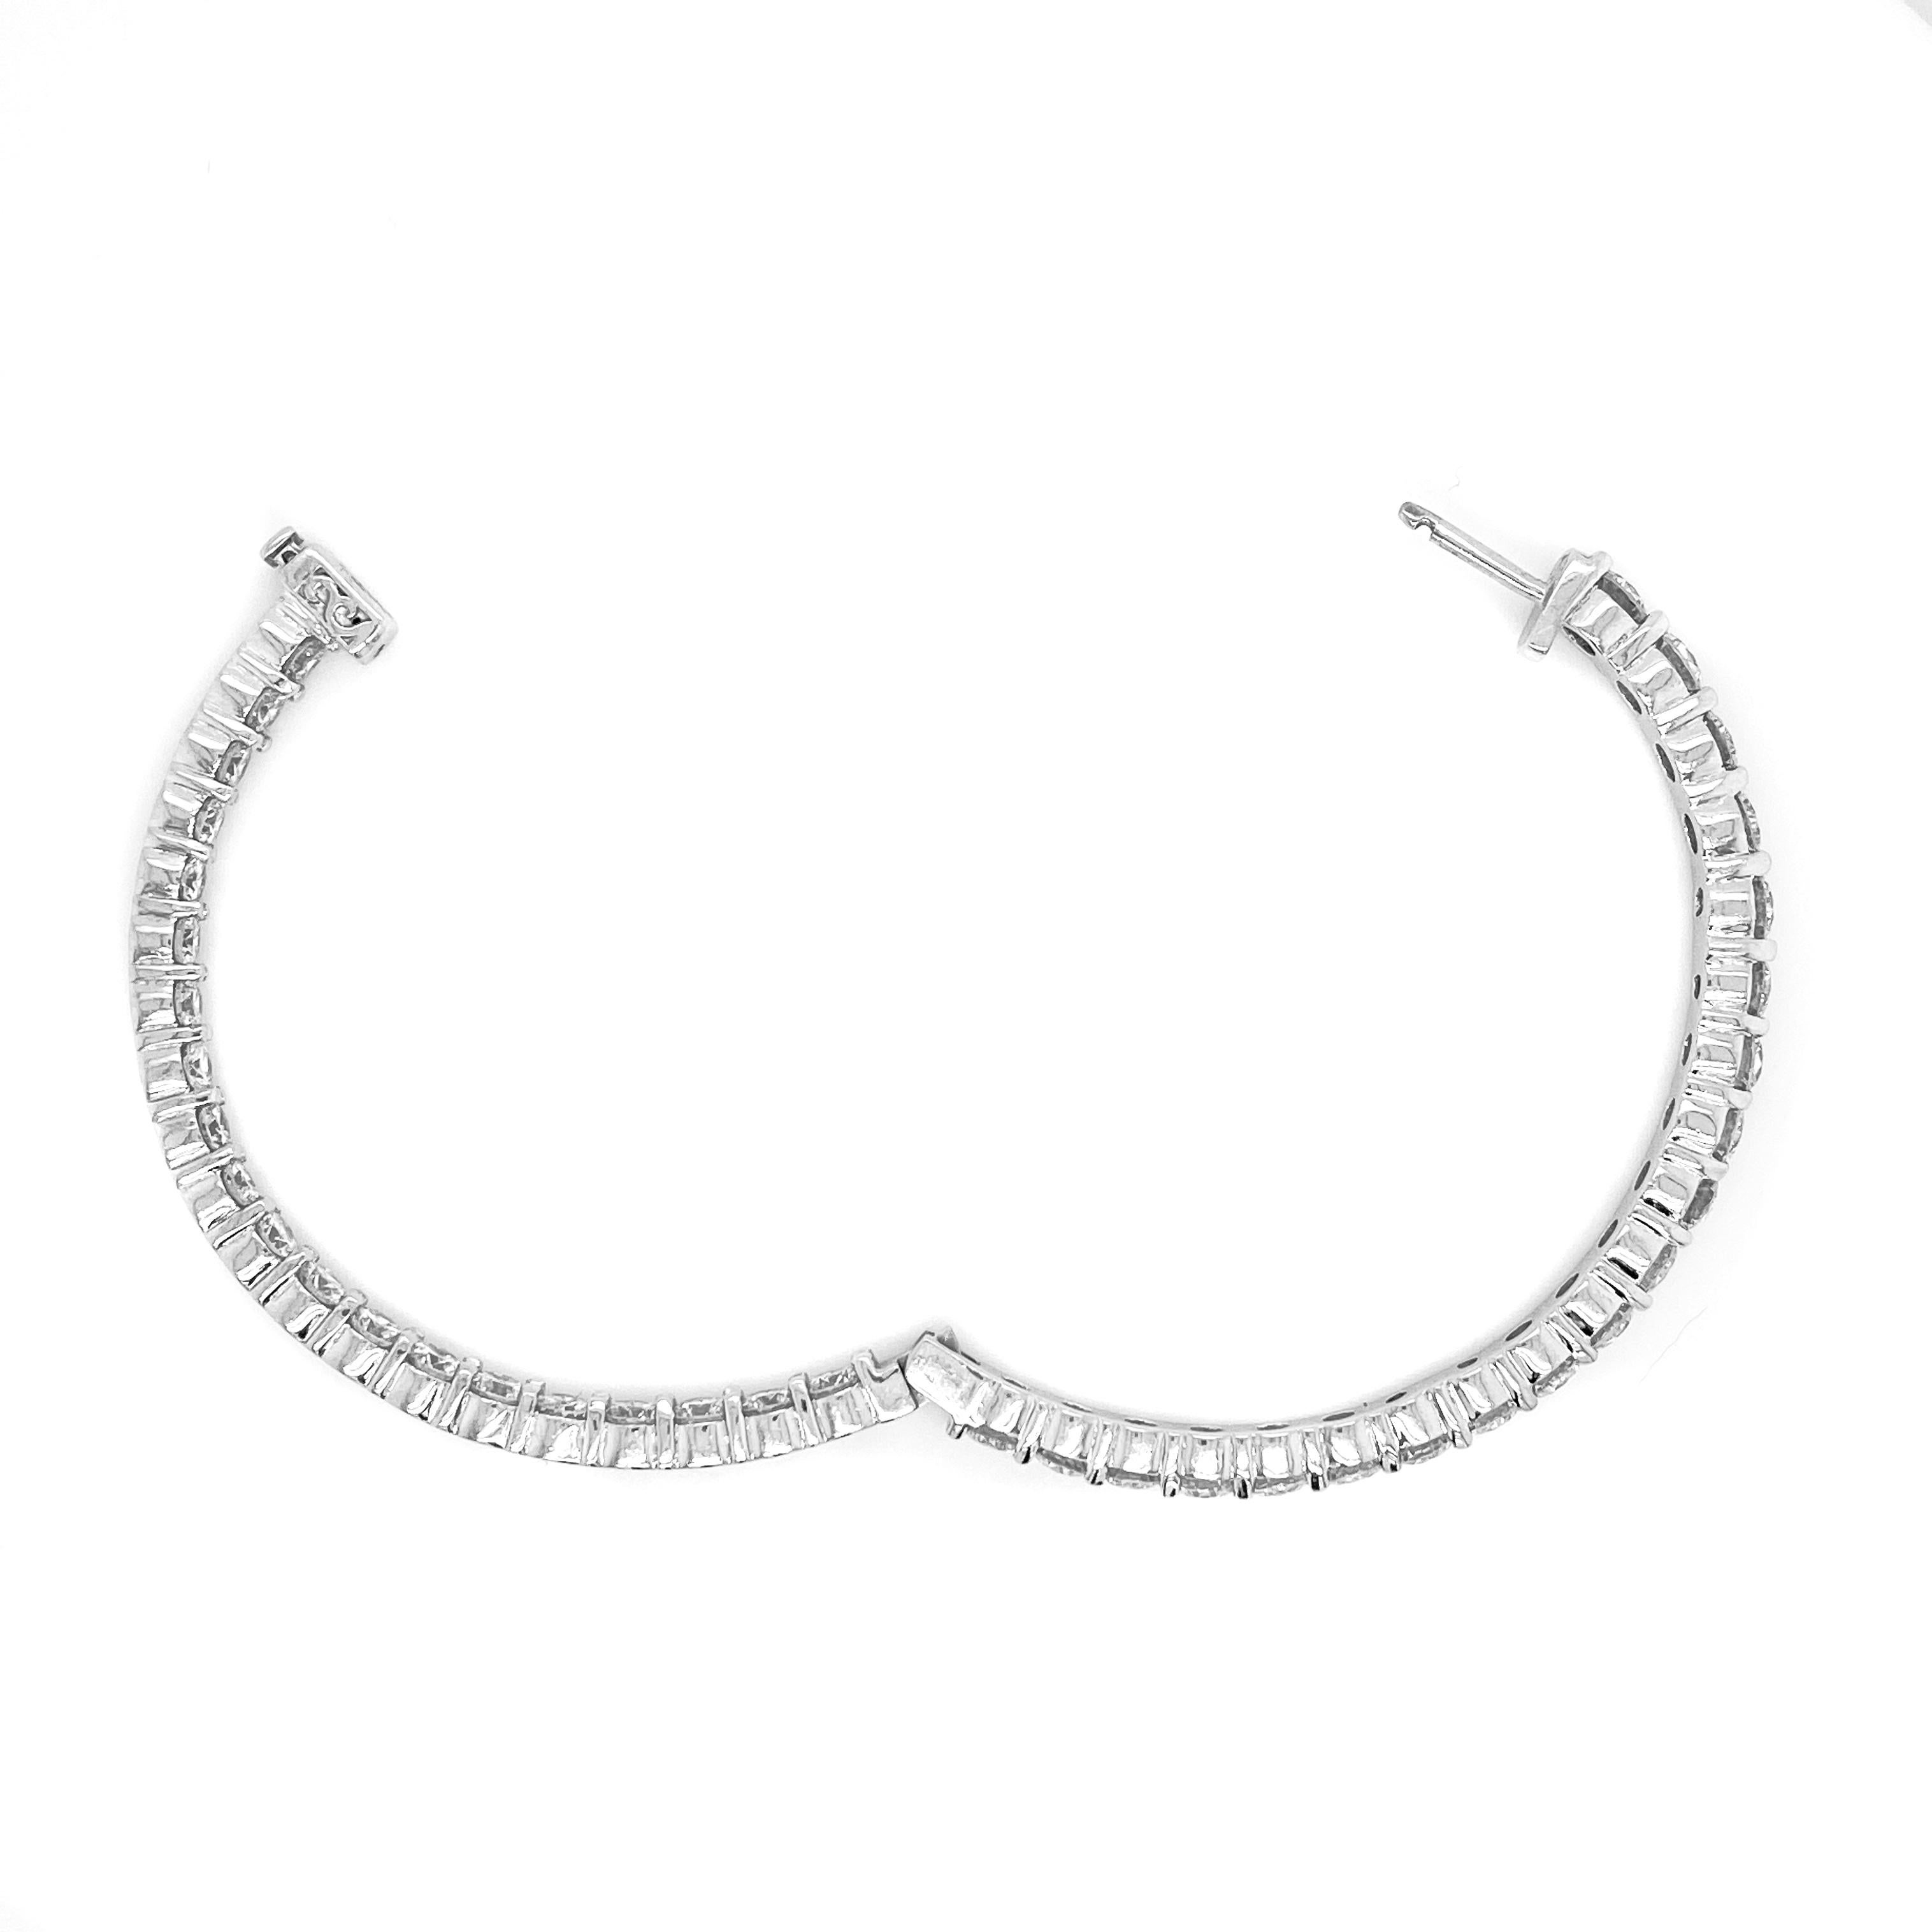 14K White Gold and Diamond Large Inside-Out Hoop Earrings

These stunning earrings have apprx. 11 carats diamonds total weight. Diamonds are all G color, VS clarity

These diamonds are set using sharing prongs. 

2 inches from top to bottom and 2